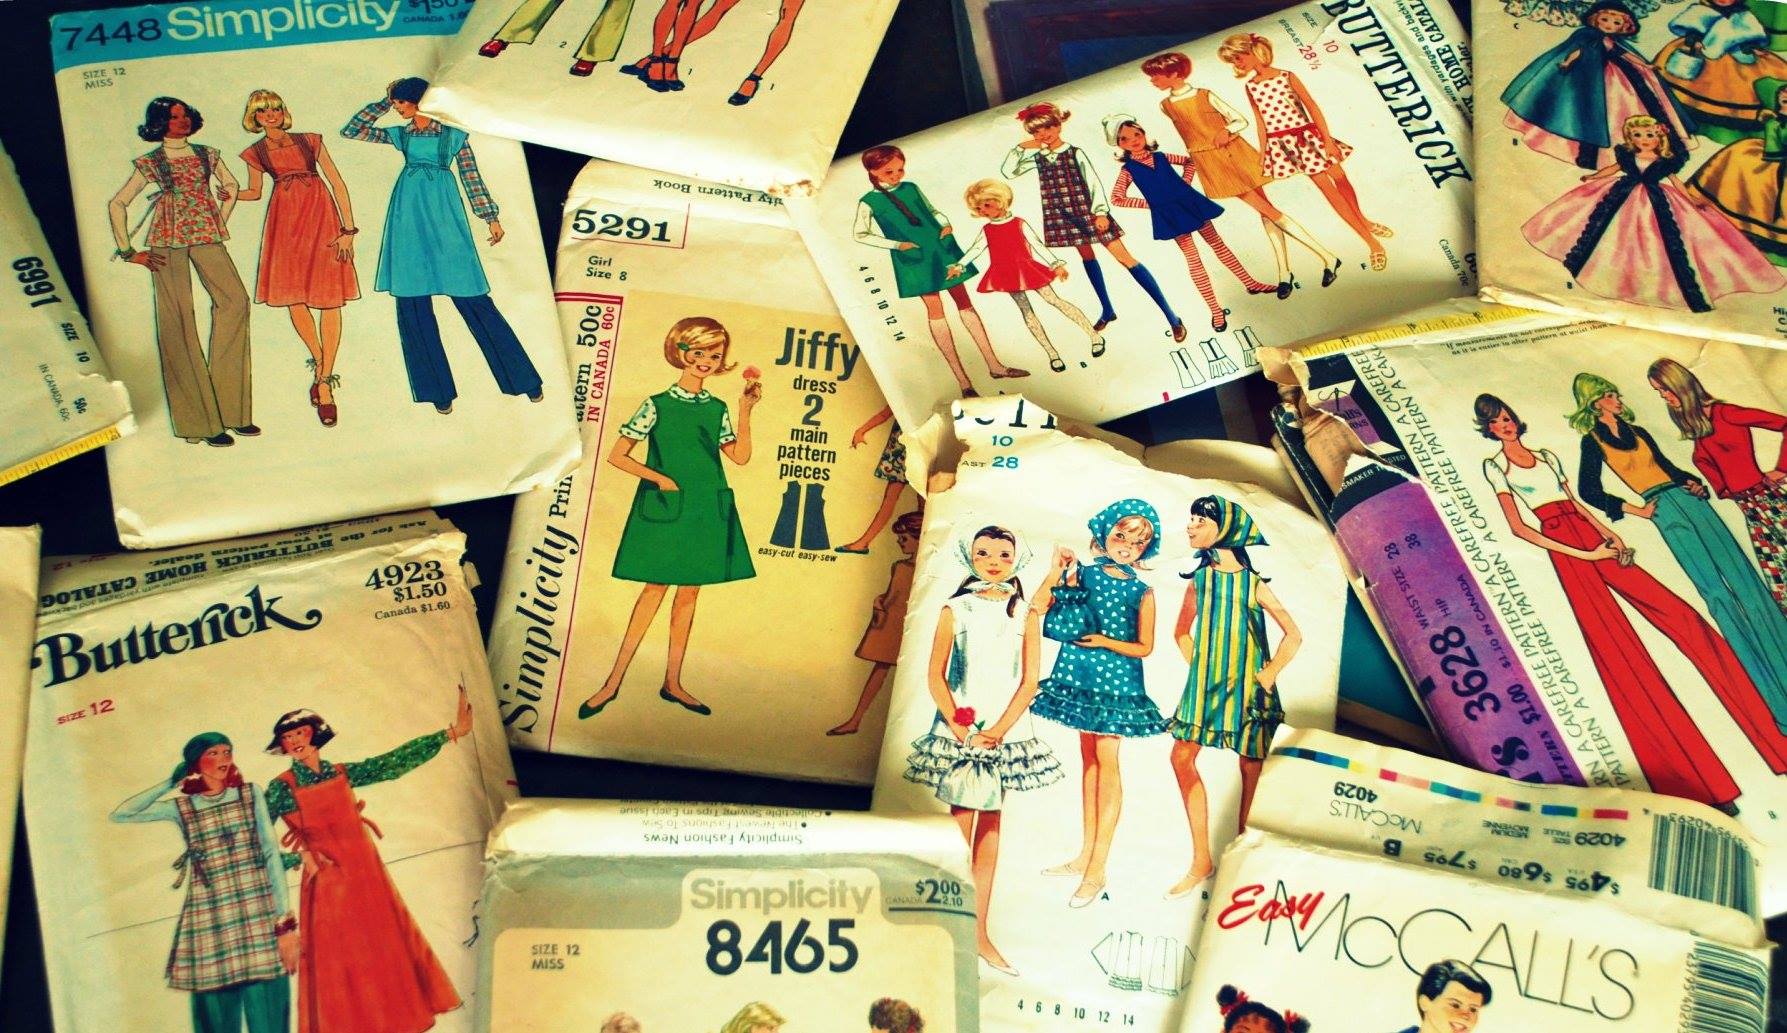 commercial sewing patterns - 1669 In Canada, 60C Size 12 Ol 2 Miss Size 12 Butterick, Tarick Home Catalog 7448 Simplicity 150 Canada $1.60 $1.50 4923 Miss Size 12 Simplicity Prin altern 50c In Canada 60c Size 8 5291 8465 attern Book Simplicity Fashion New